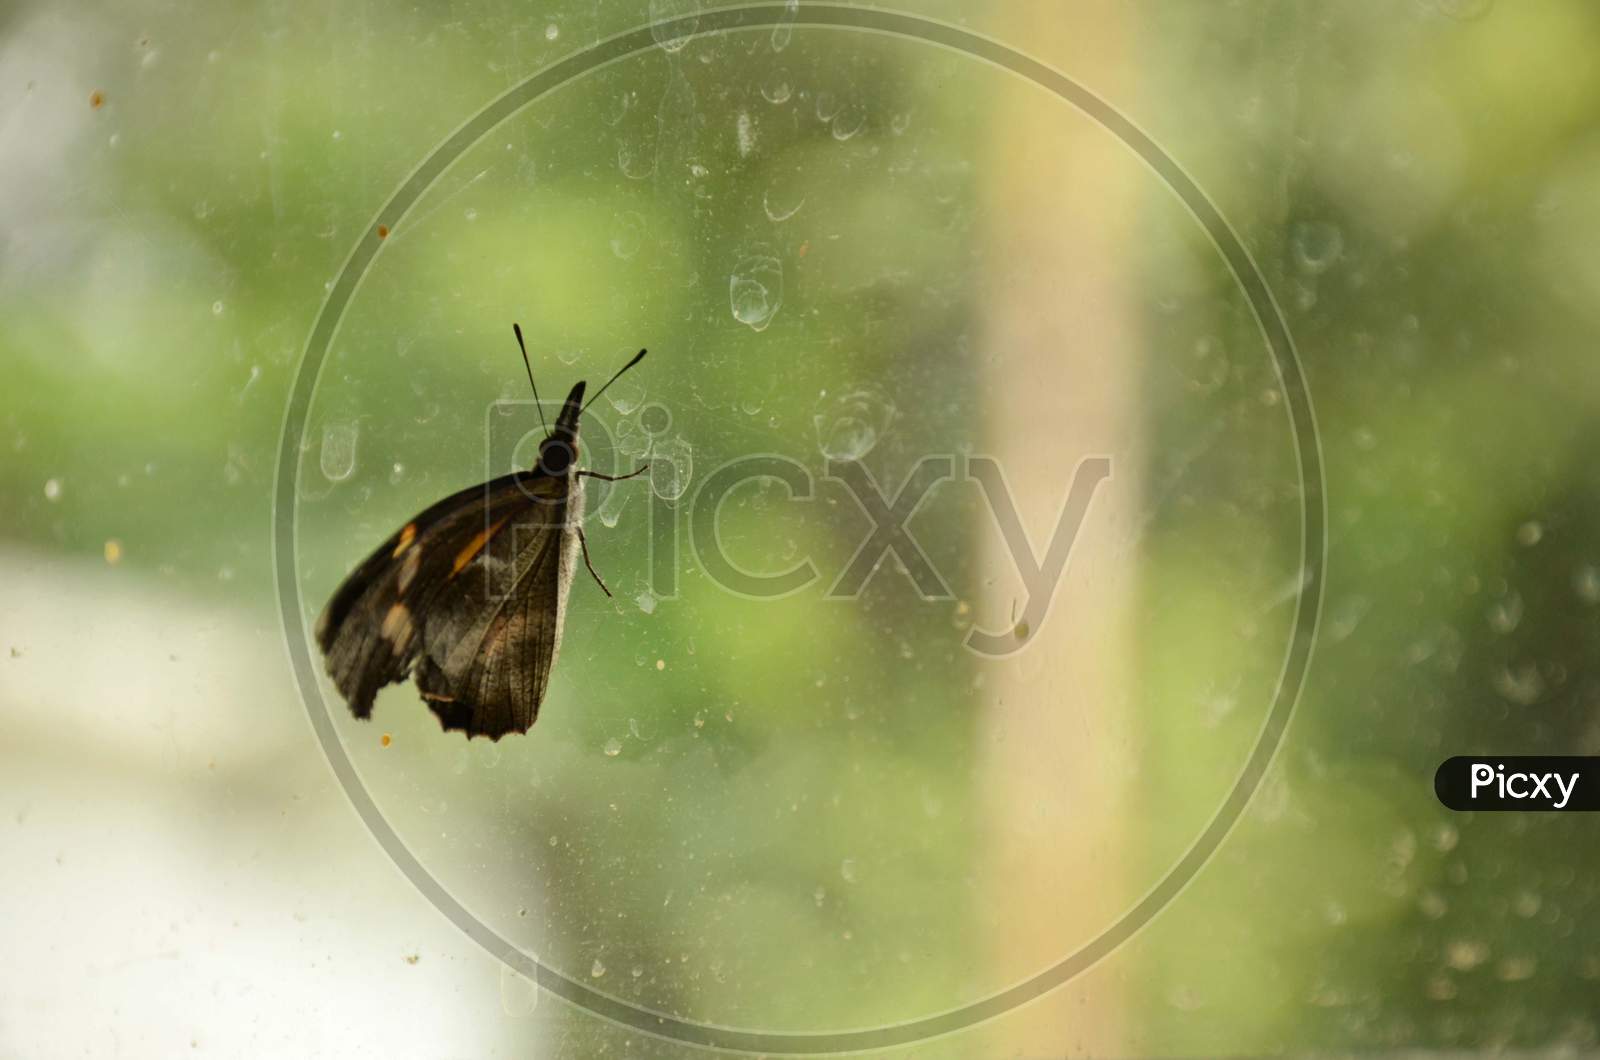 the black brown butterfly on the glass.